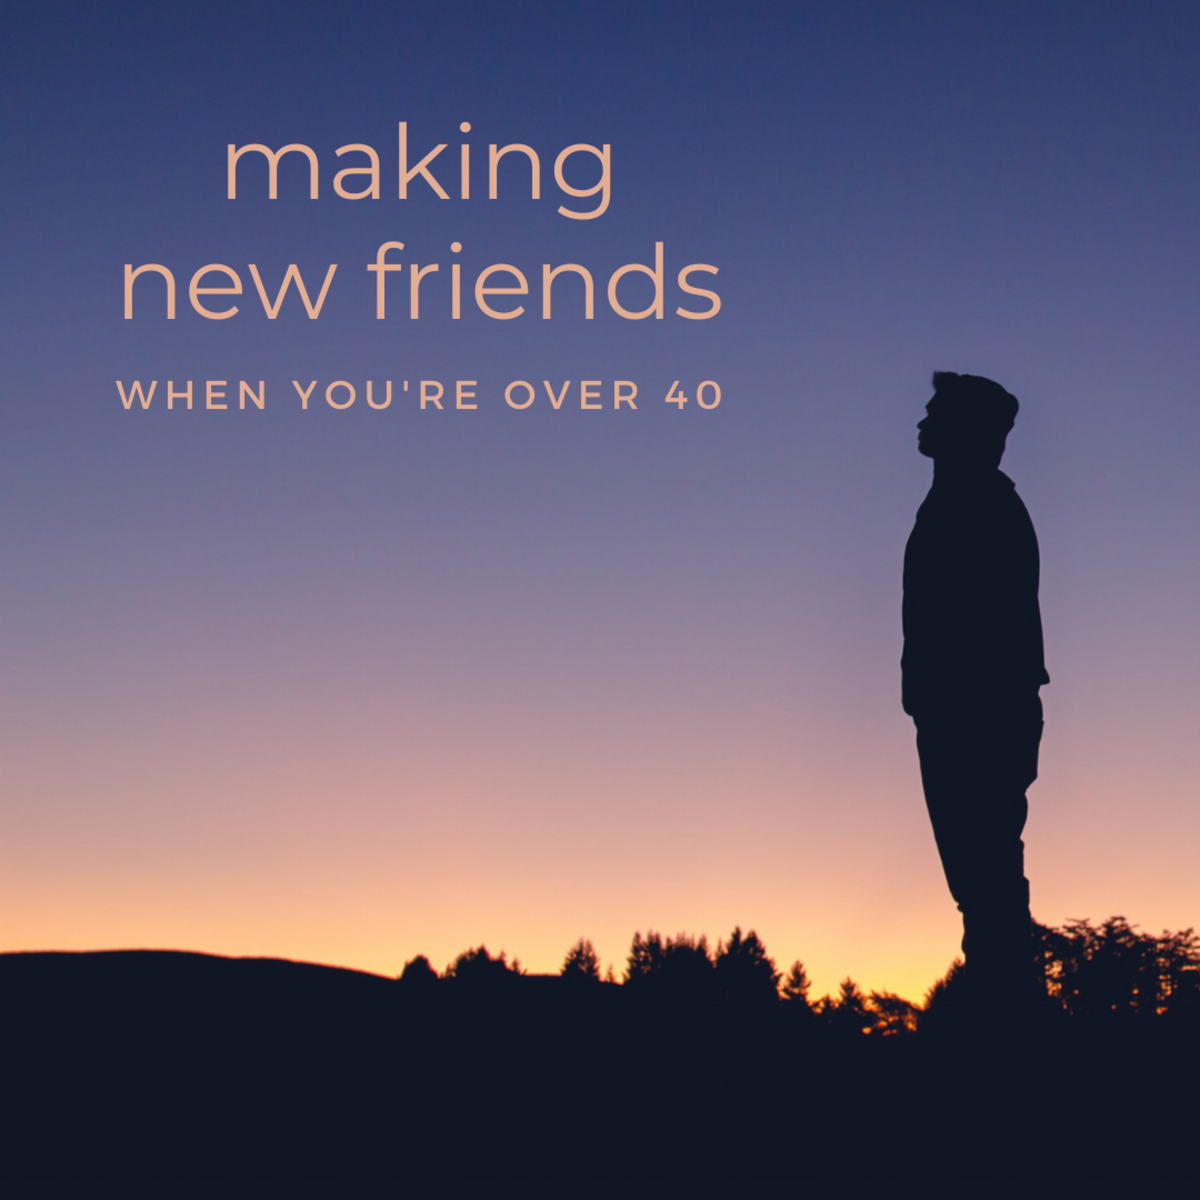 How to Make New Friends After 40